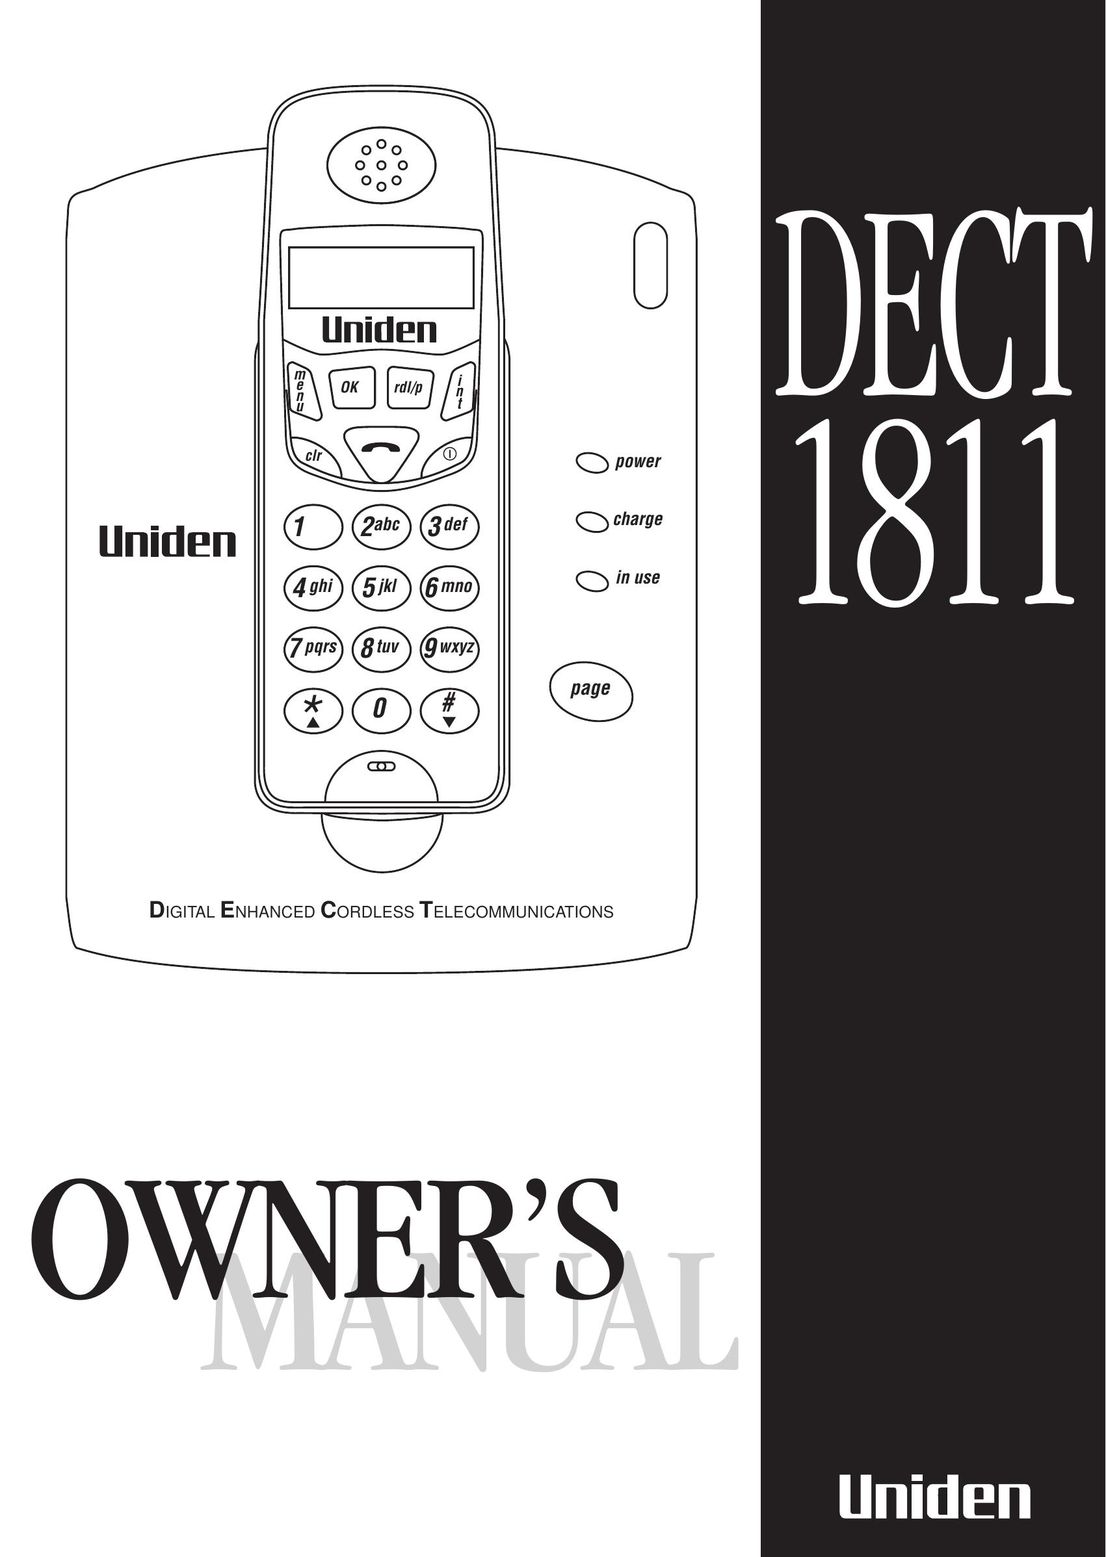 Uniden DECT 1811 Telephone User Manual